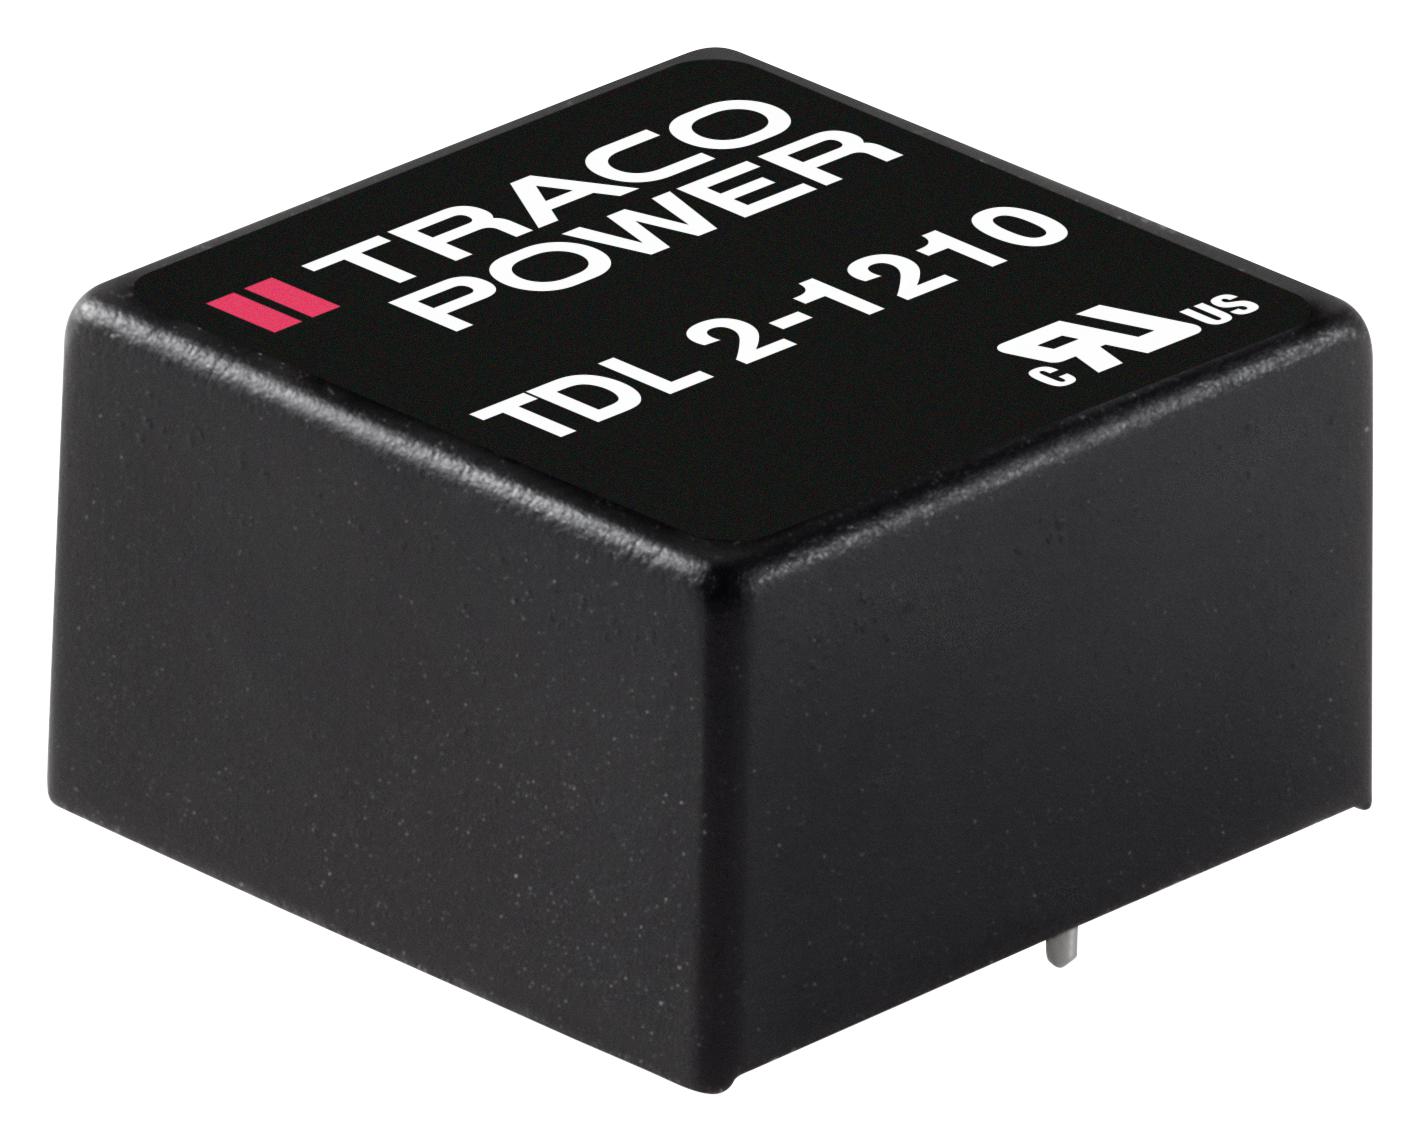 TDL 2-4822 DC-DC CONVERTER, 2 O/P, 2W TRACO POWER